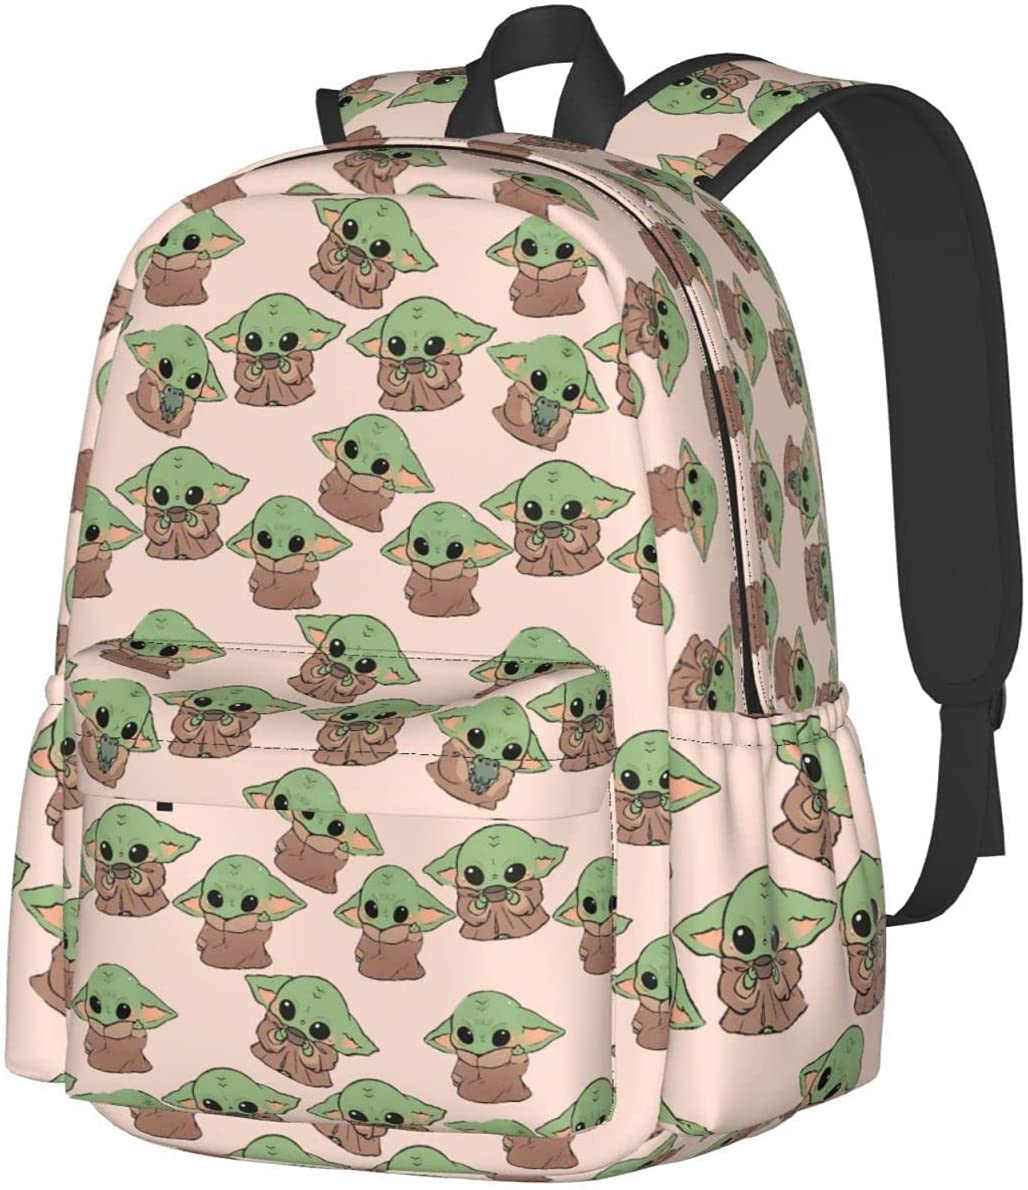 cute baby yoda backpacks your kid will be obsessed with